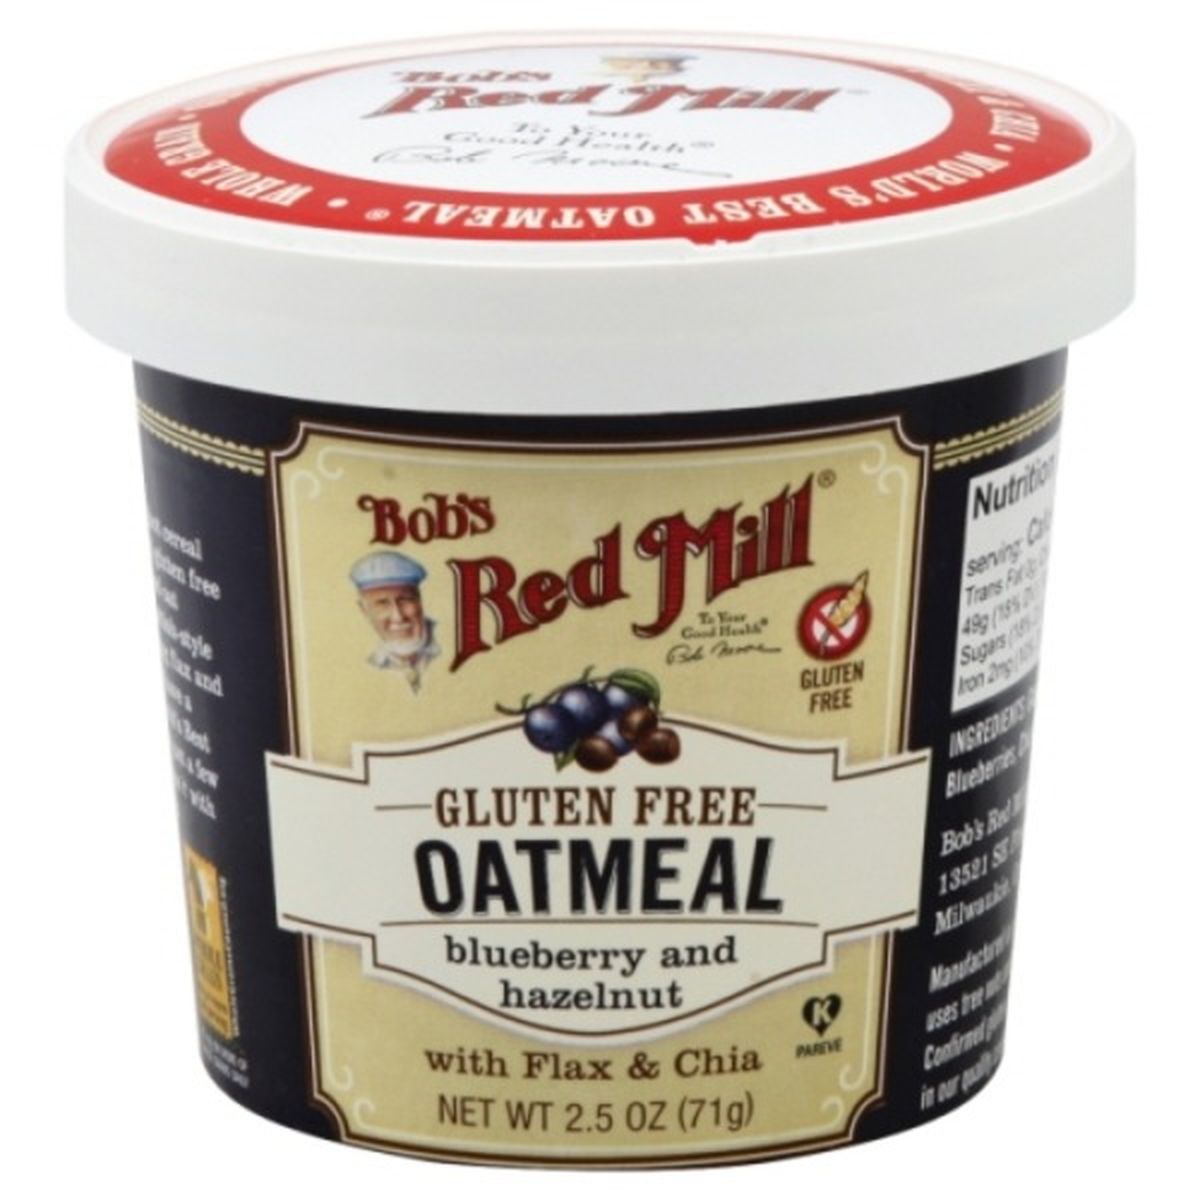 Calories in Bob's Red Mill Oatmeal, Blueberry and Hazelnut